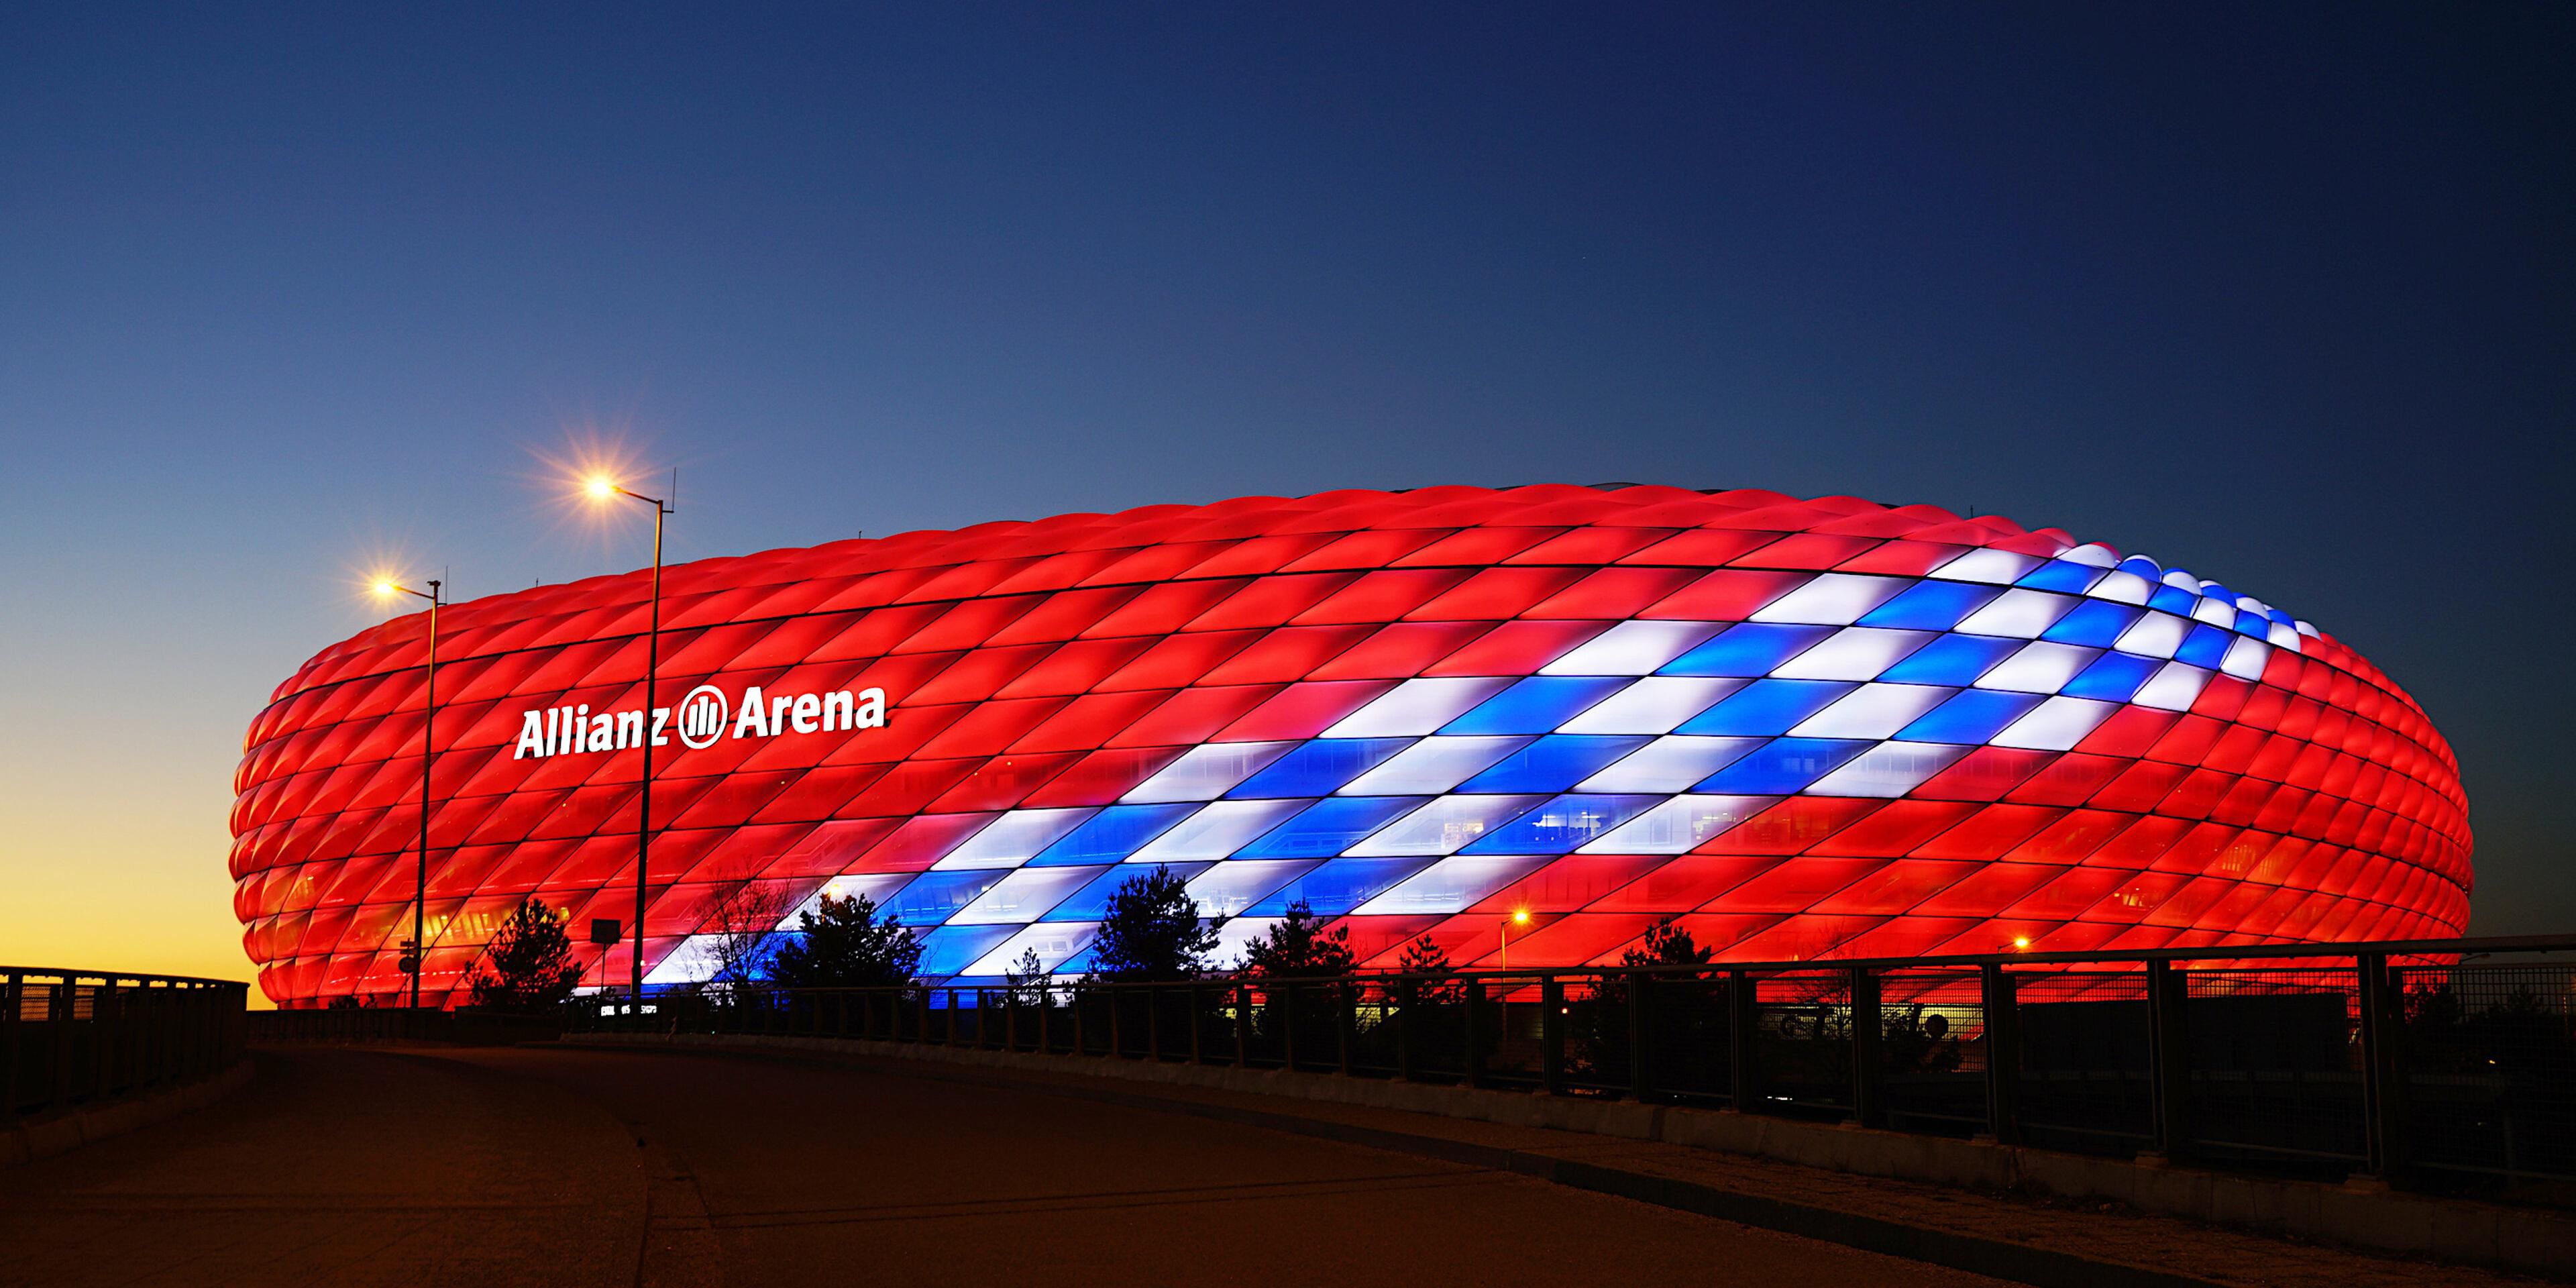 The Allianz Arena is a football stadium in the north of Munich and offers 75.021 seats for national games. FC Bayern Munich has played its home games in the Allianz Arena since the 2005/06 season. The air-cushion facade can display a color spectrum of 16 million colors with 380.000 LEDs. The Allianz Arena lights up red for home games of FC Bayern.